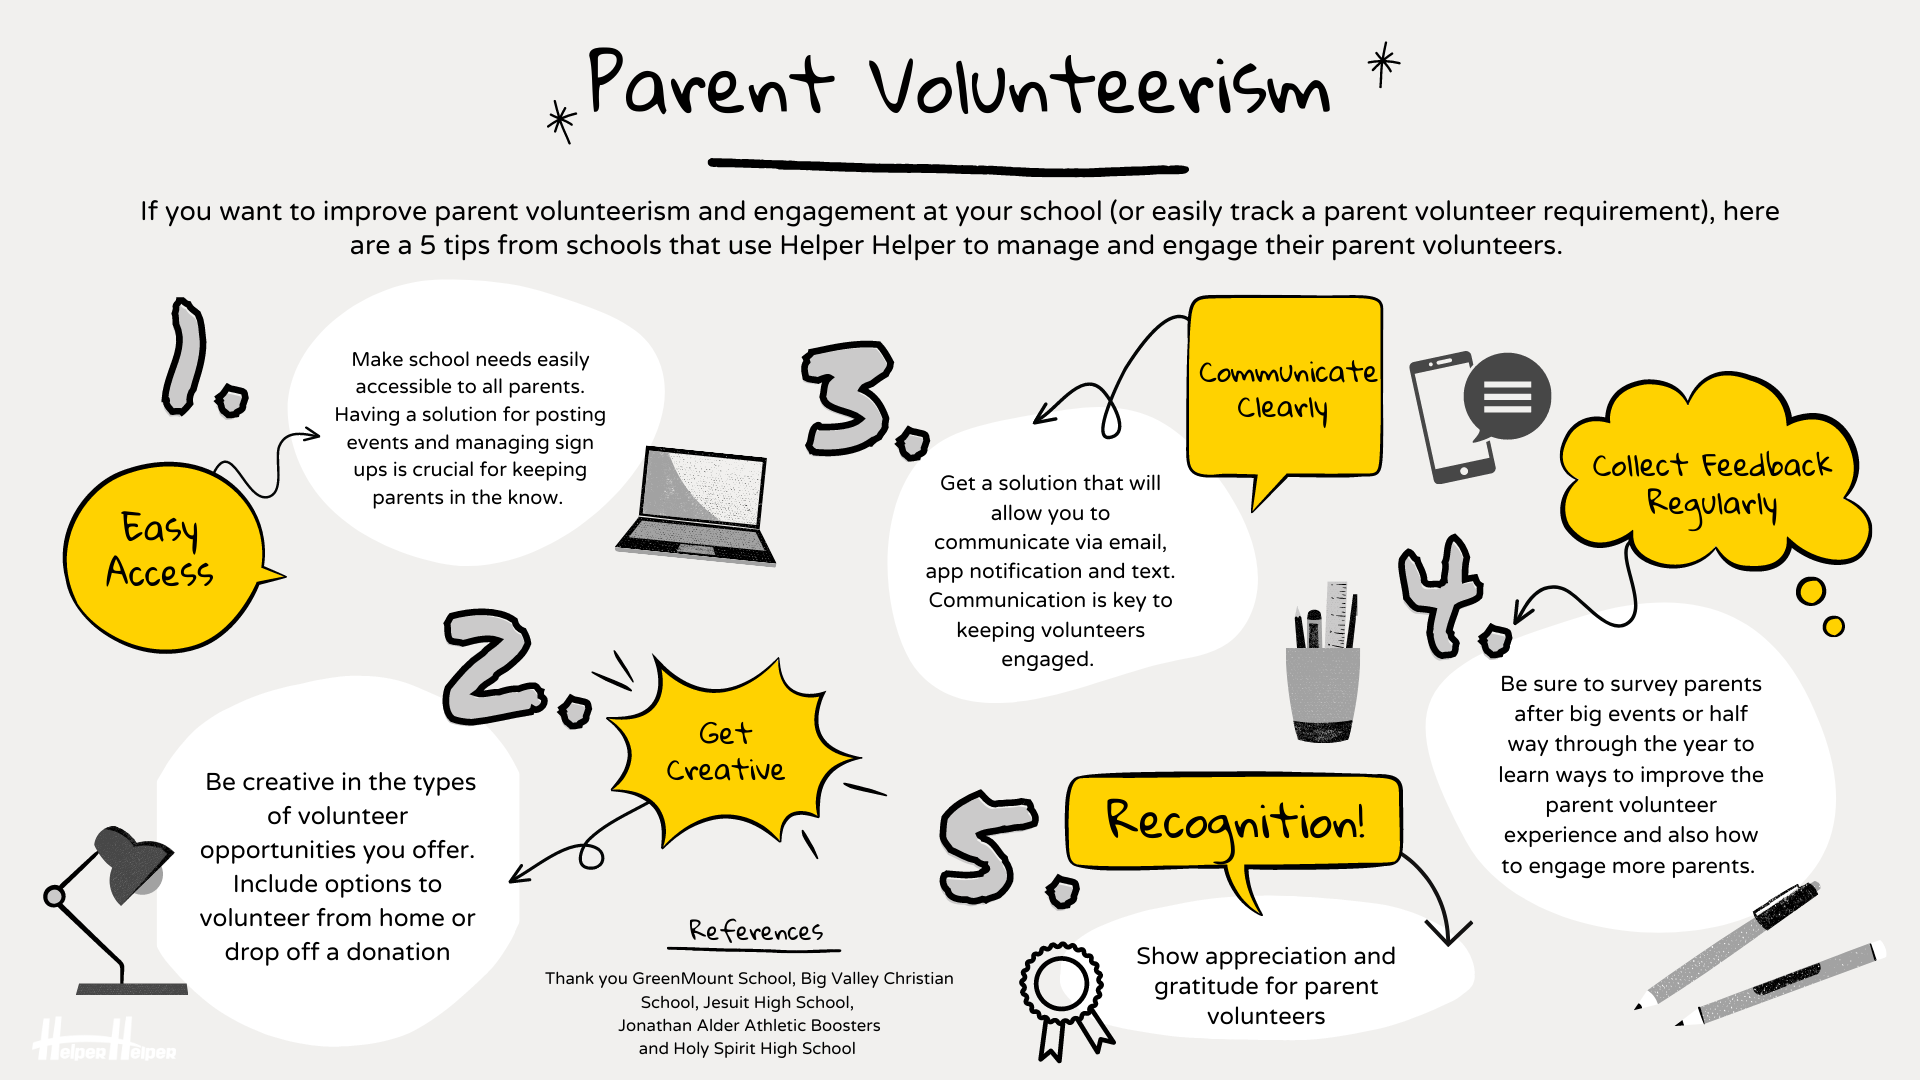 5 Ways to Help your Parent Volunteers be More Involved